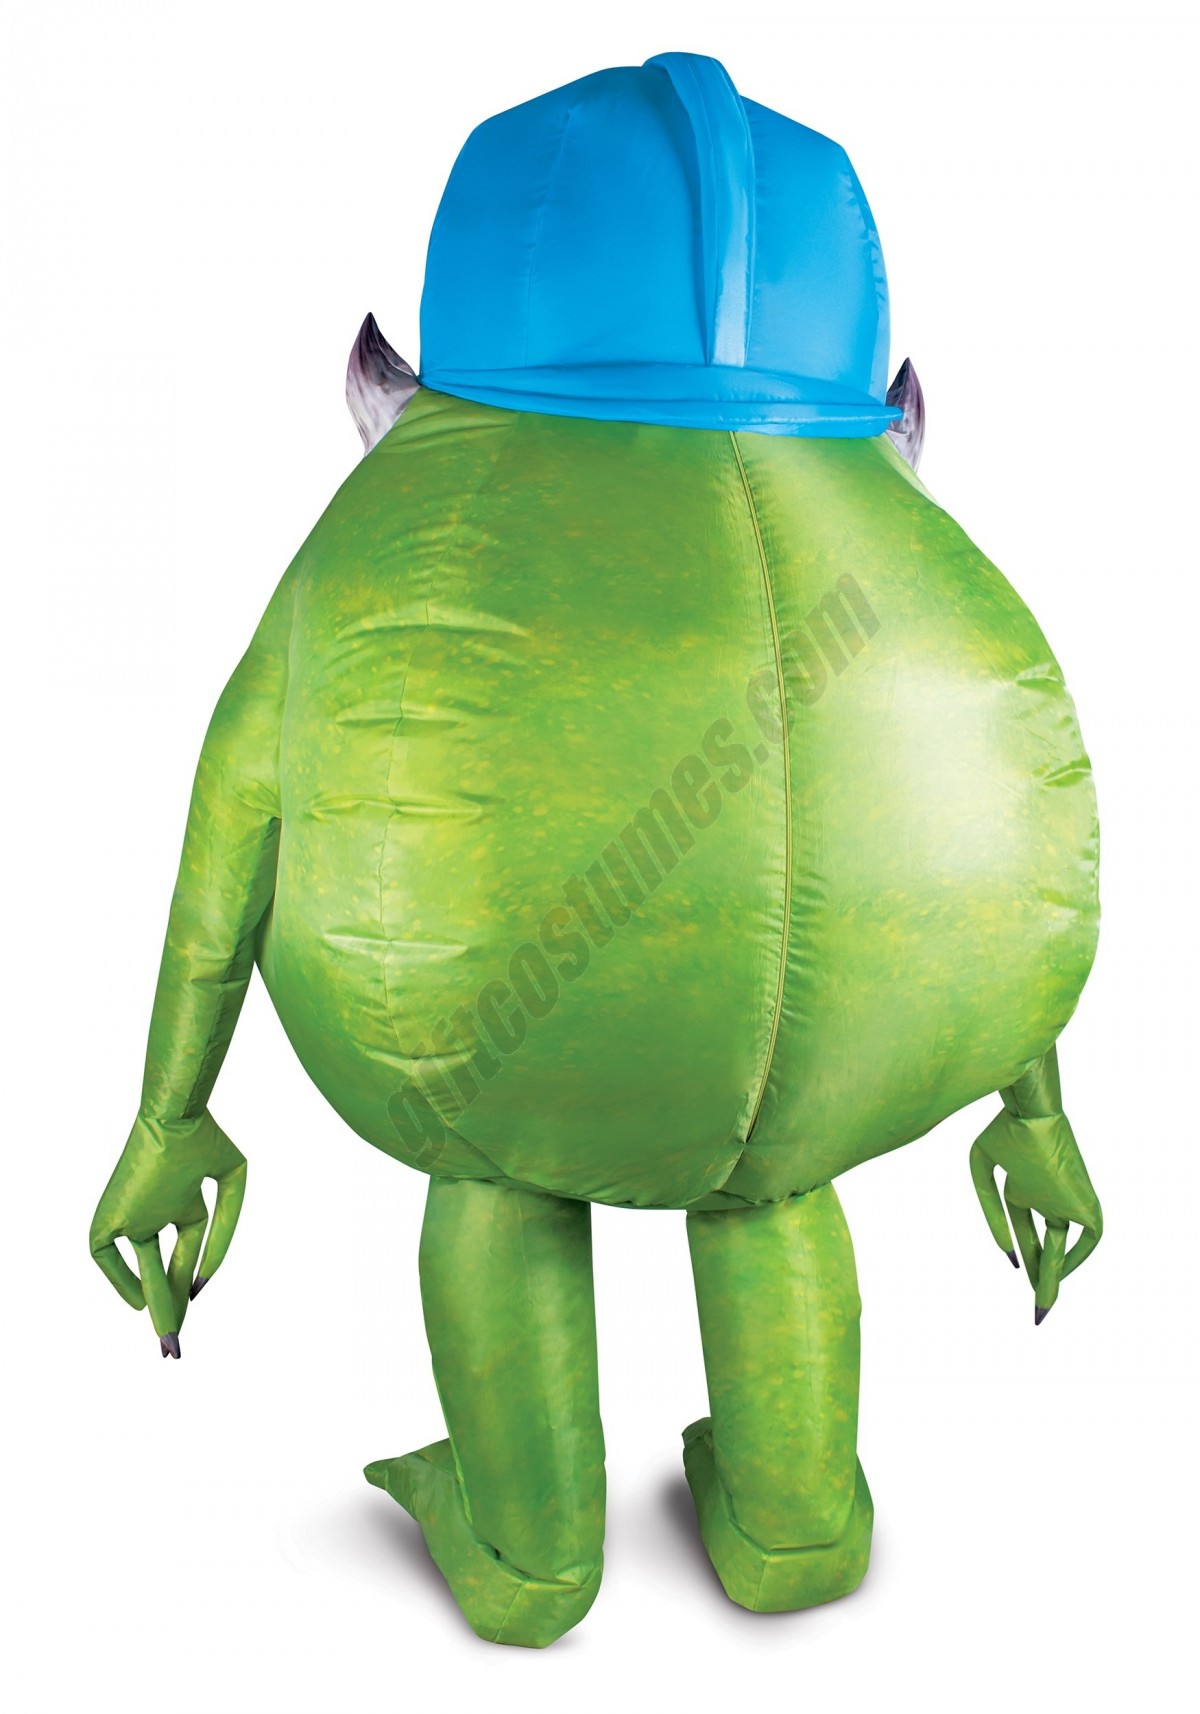 Monsters Inc Mike Wazowski Inflatable Costume for Adults - Men's - -1